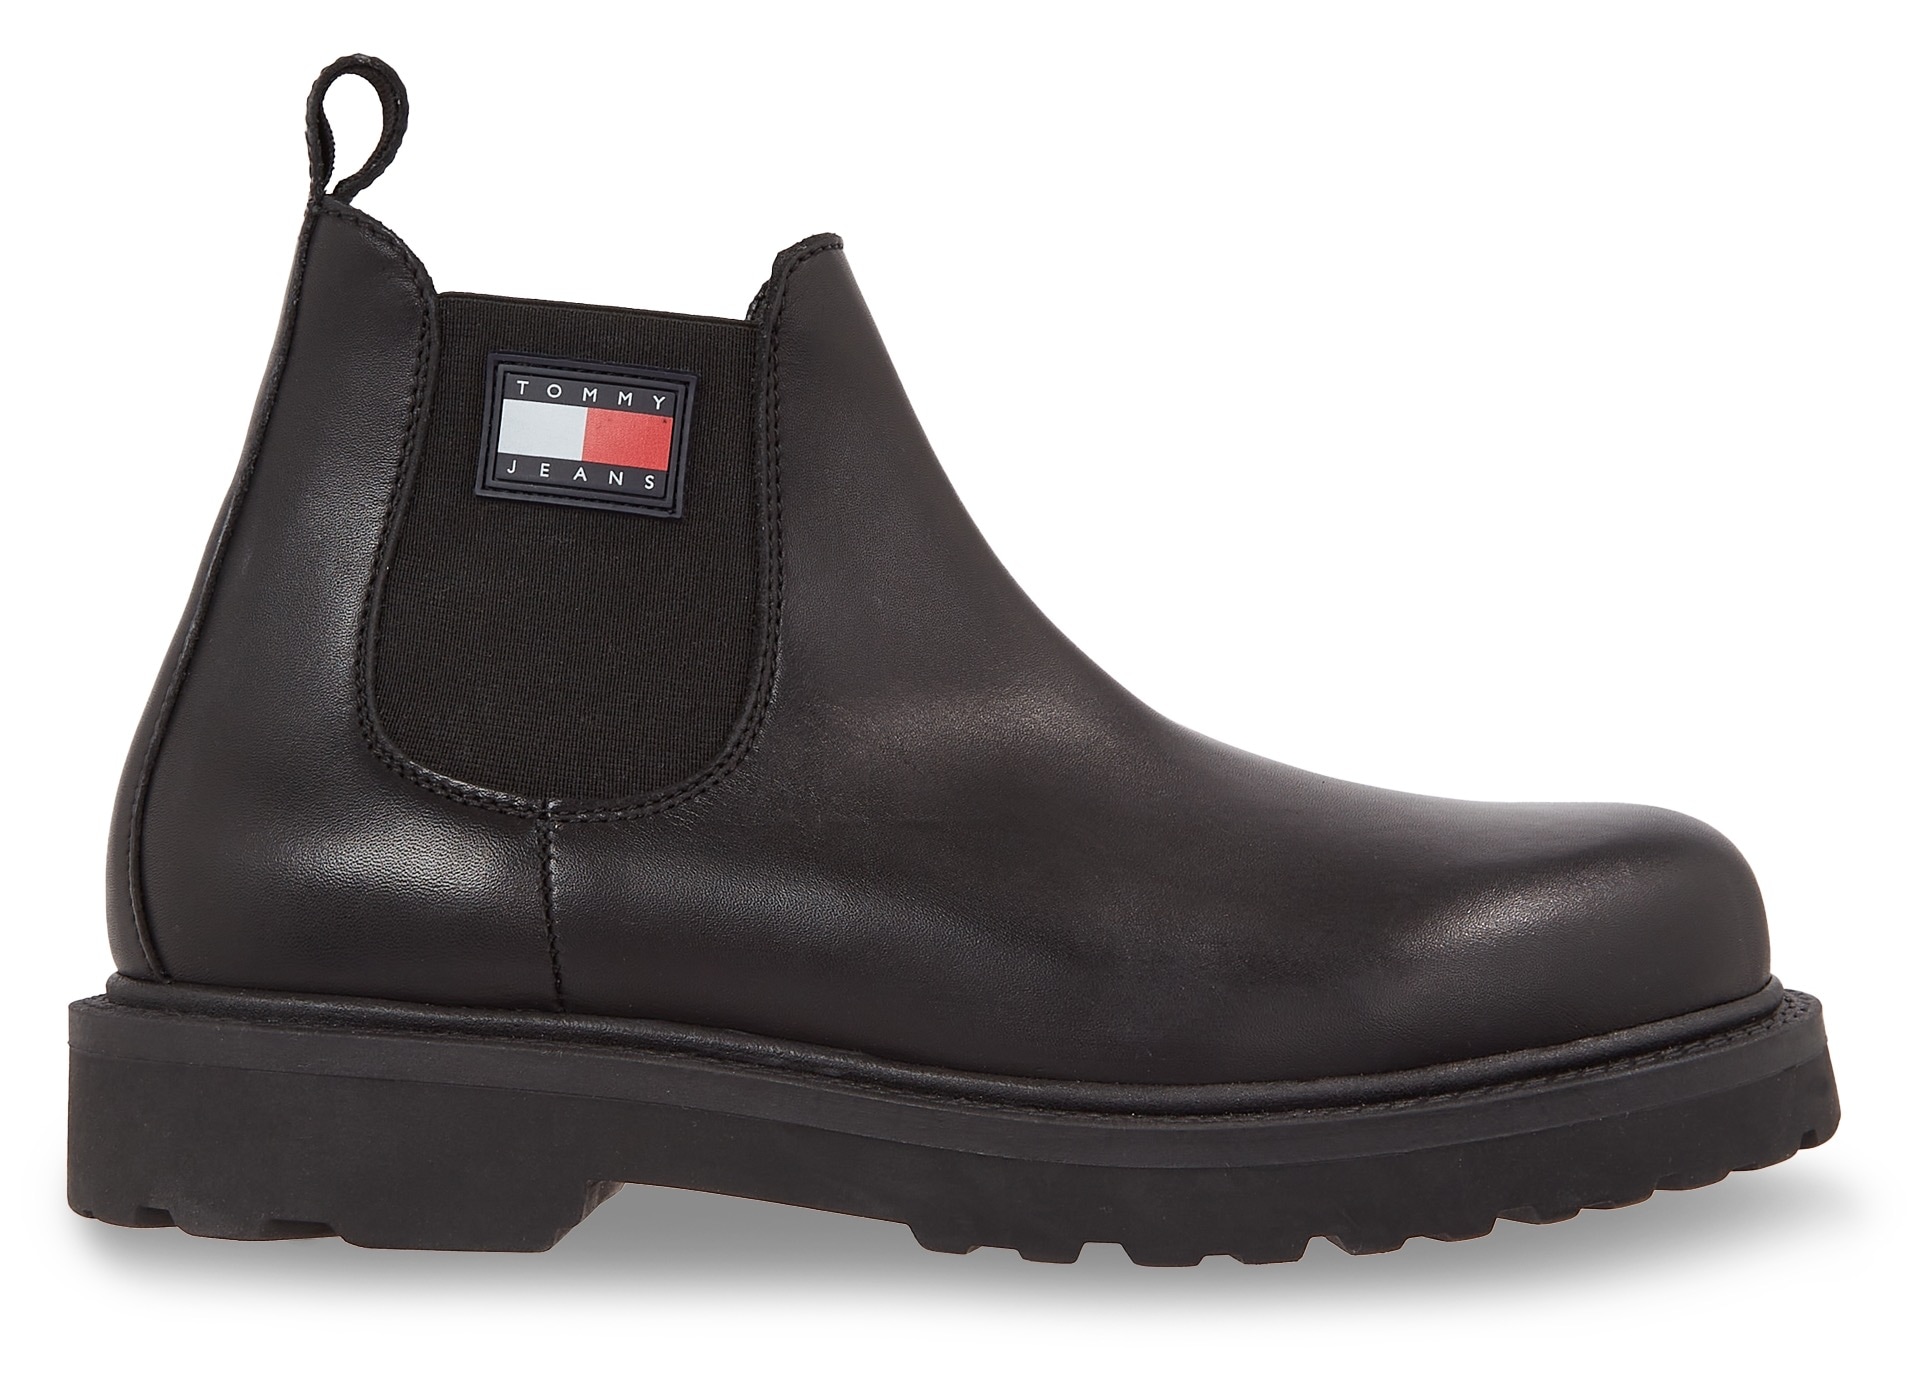 Tommy Jeans Chelseaboots "TJM NAPA LEATHER", in bequemer Form